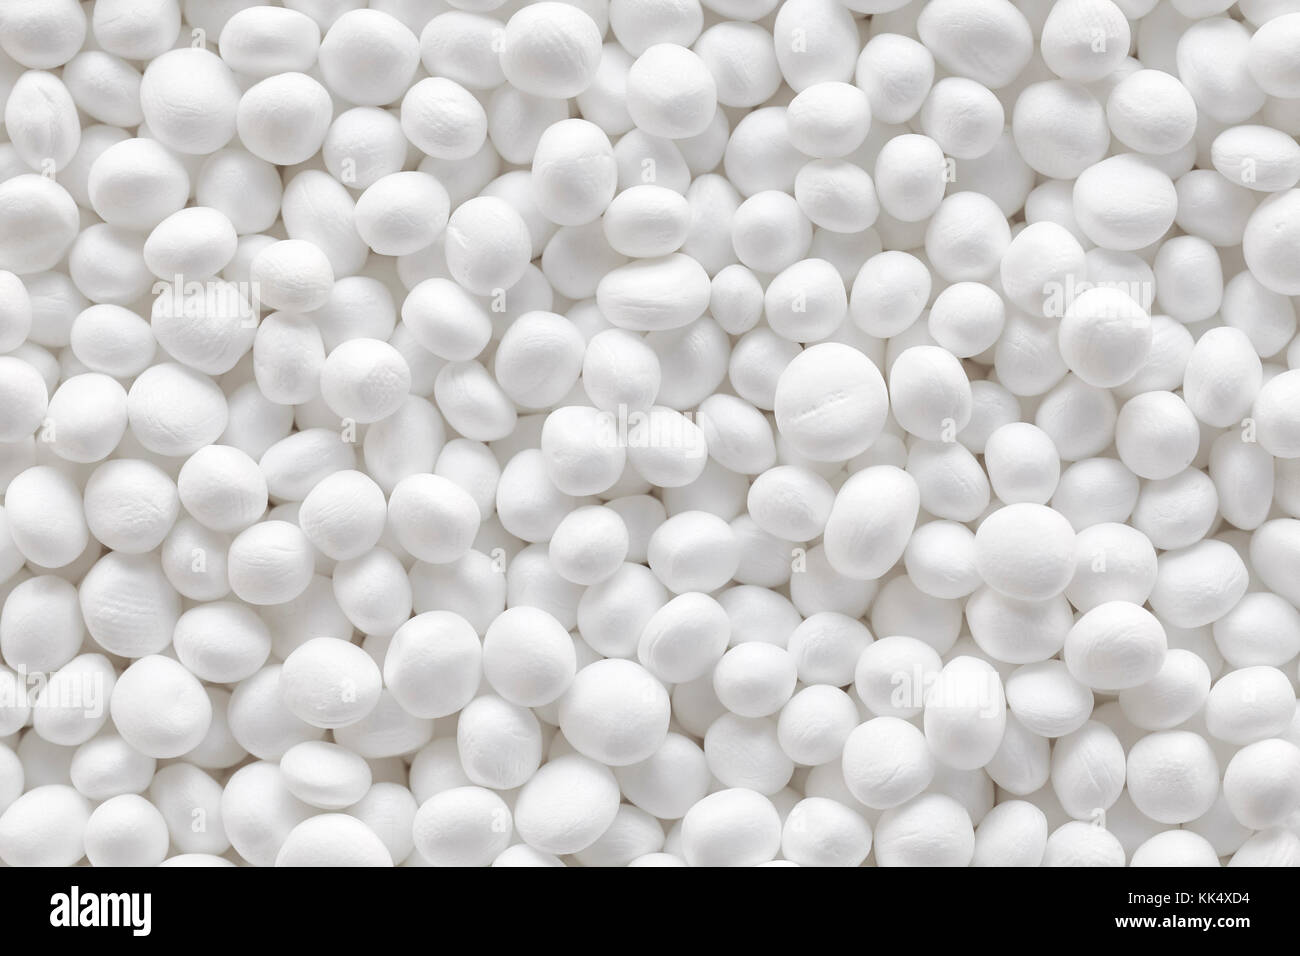 Small White Styrofoam Balls To Fill An Upholstered Chair Stock Photo -  Download Image Now - iStock